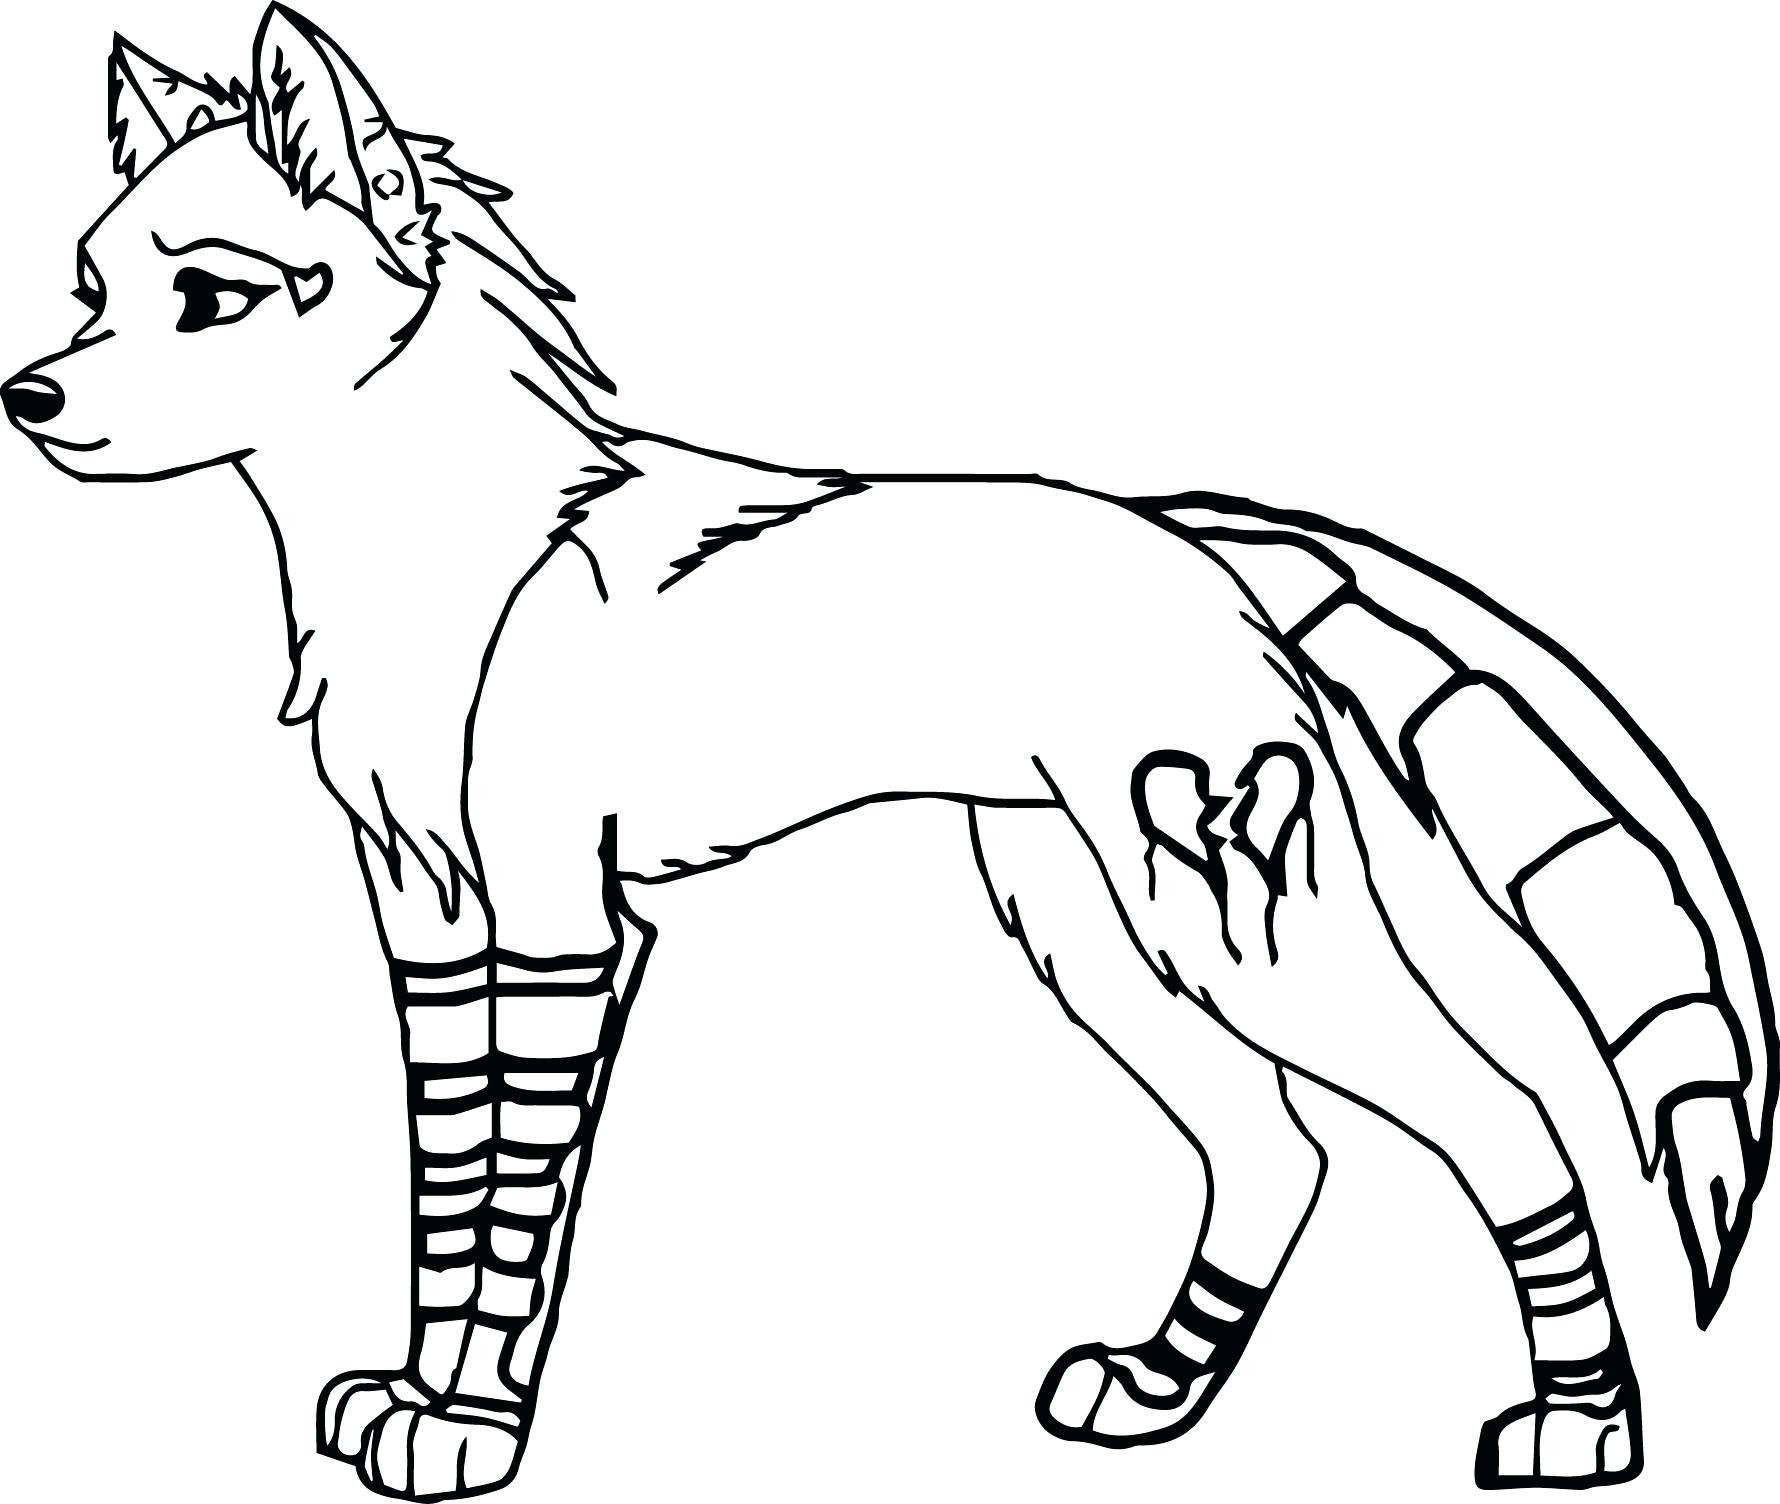 Detailed Wolf Coloring Pages at GetColorings.com | Free printable